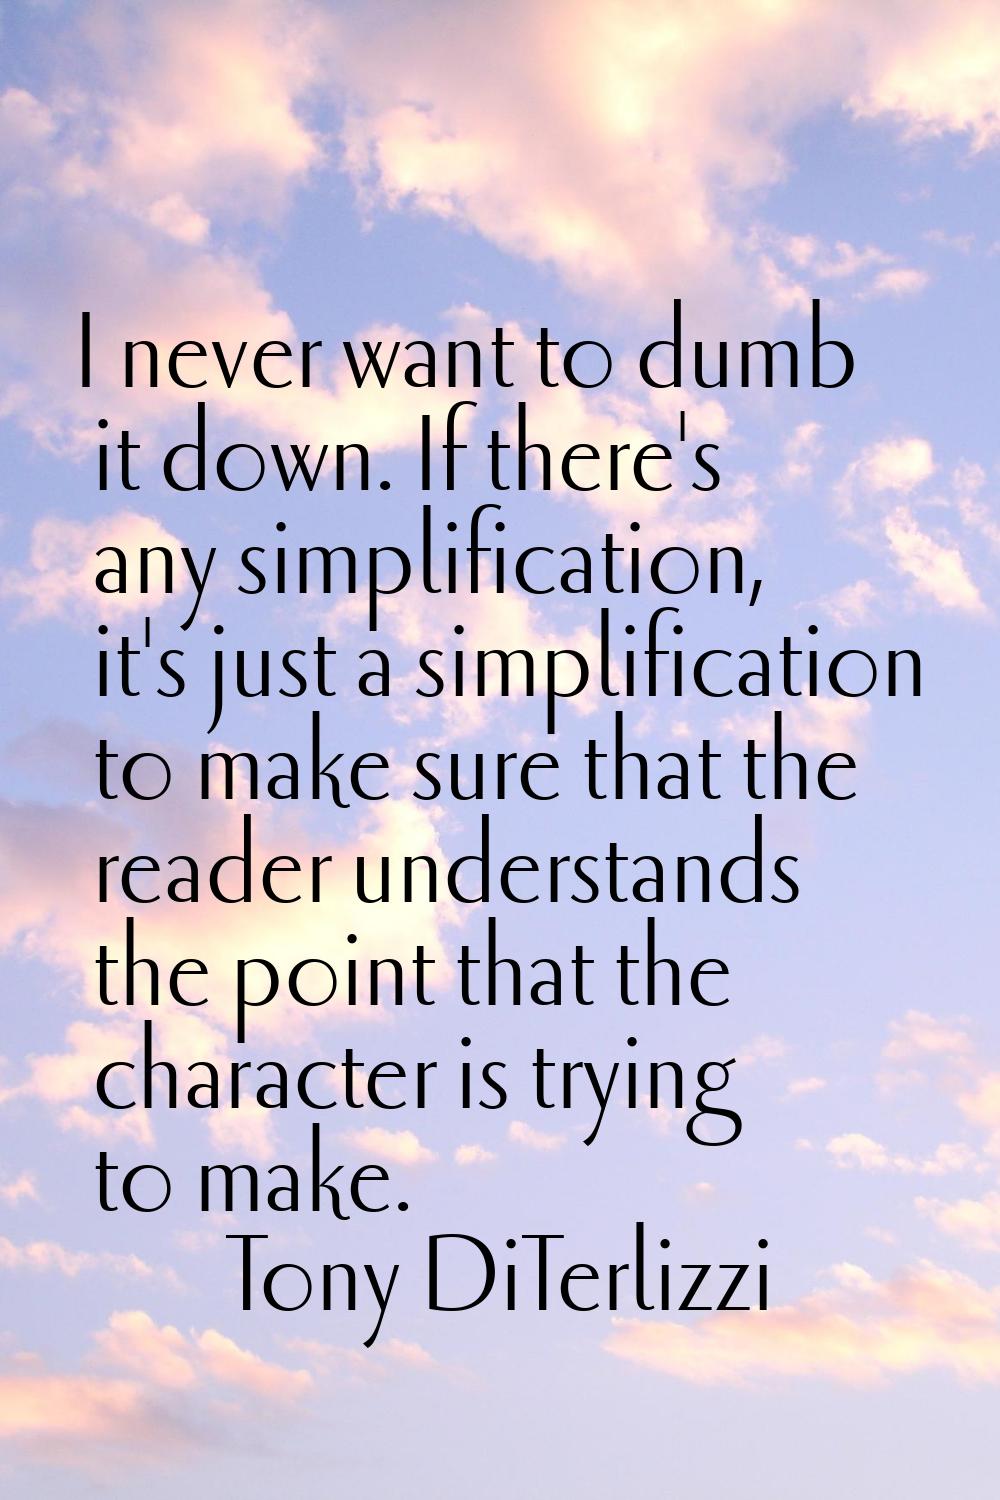 I never want to dumb it down. If there's any simplification, it's just a simplification to make sur